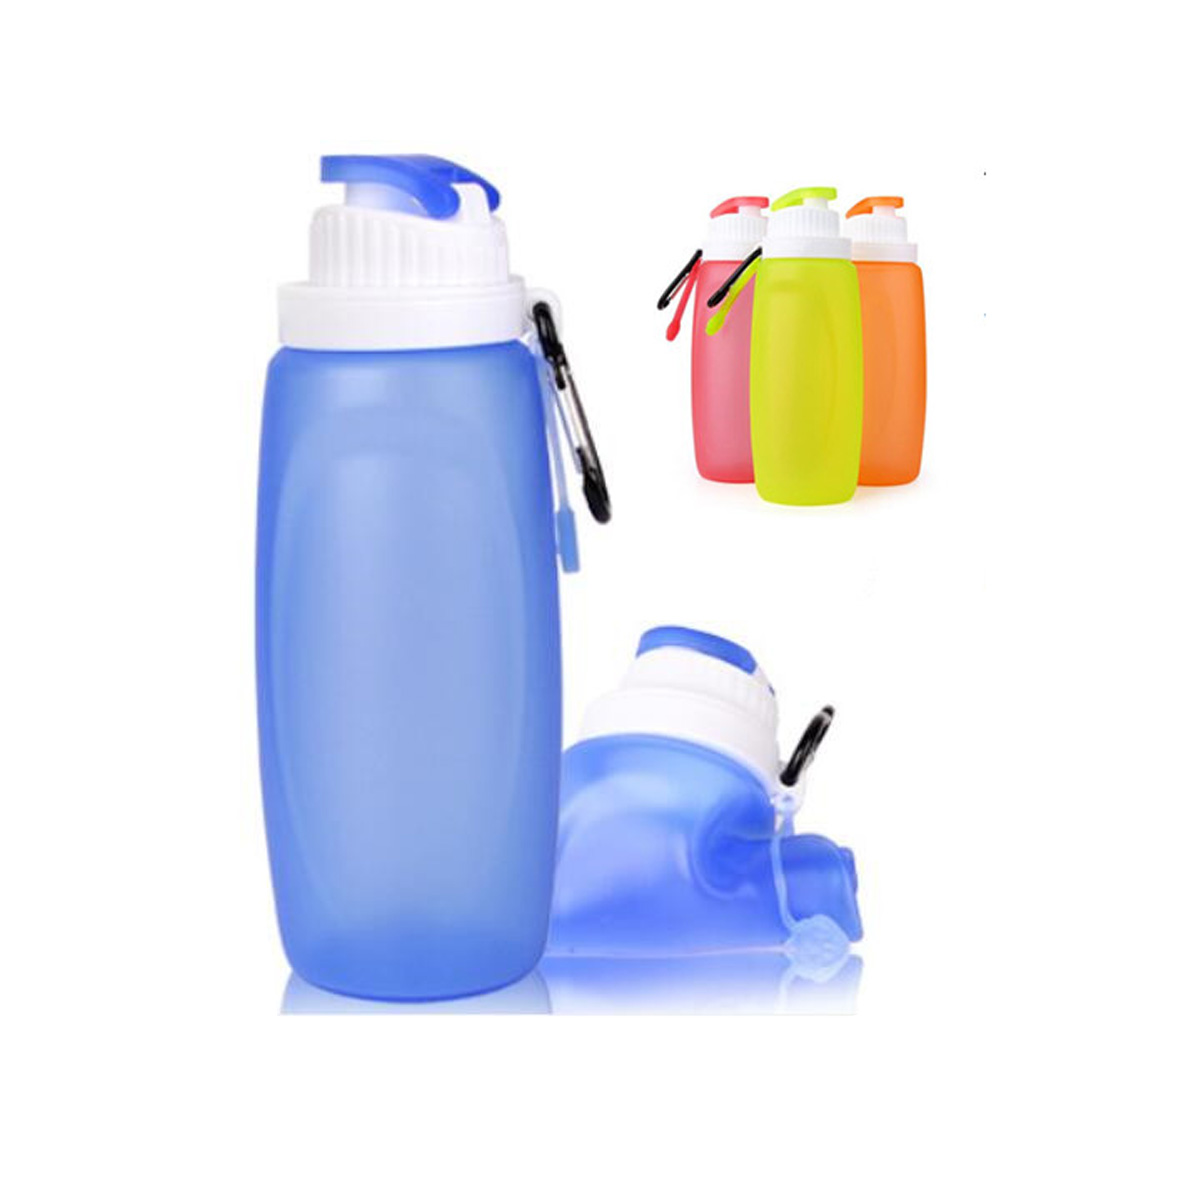 GL-ELY1176 10oz Foldable Silicone Water Bottle